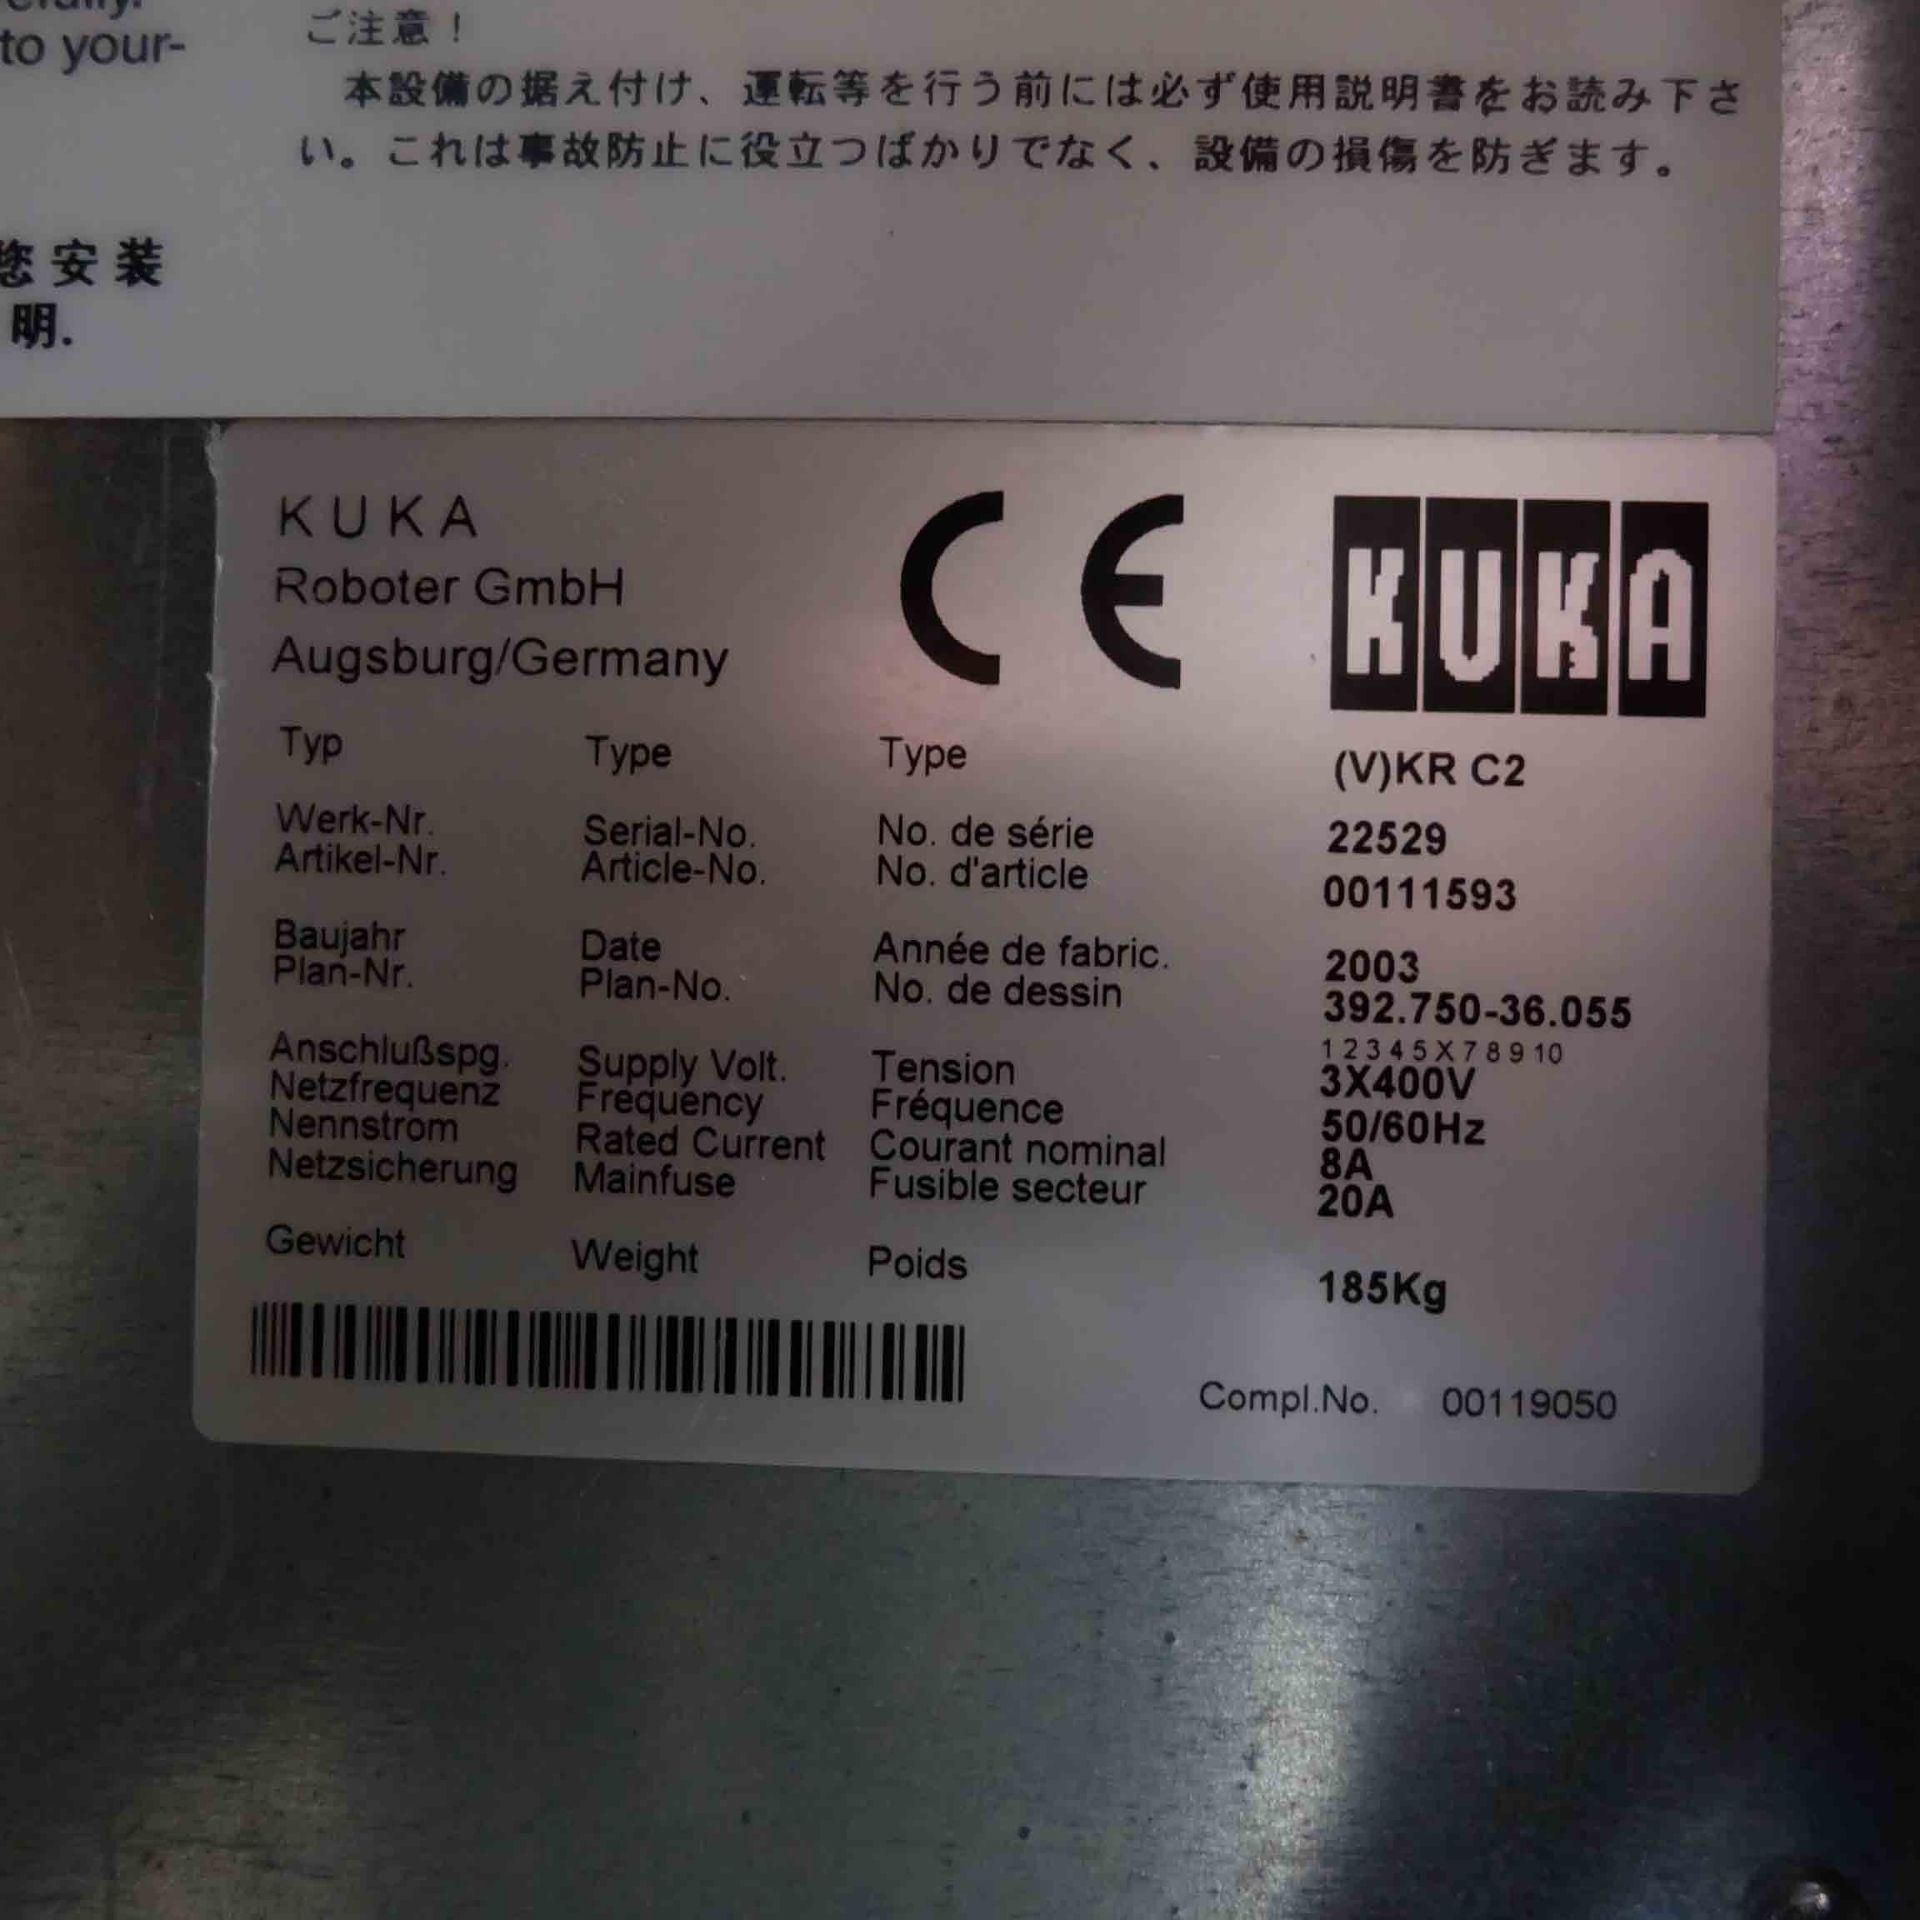 2 x Kuka Type KR125 6 Axis Robotic Arms. (1 Complete & 1 Incomplete). - Image 15 of 35